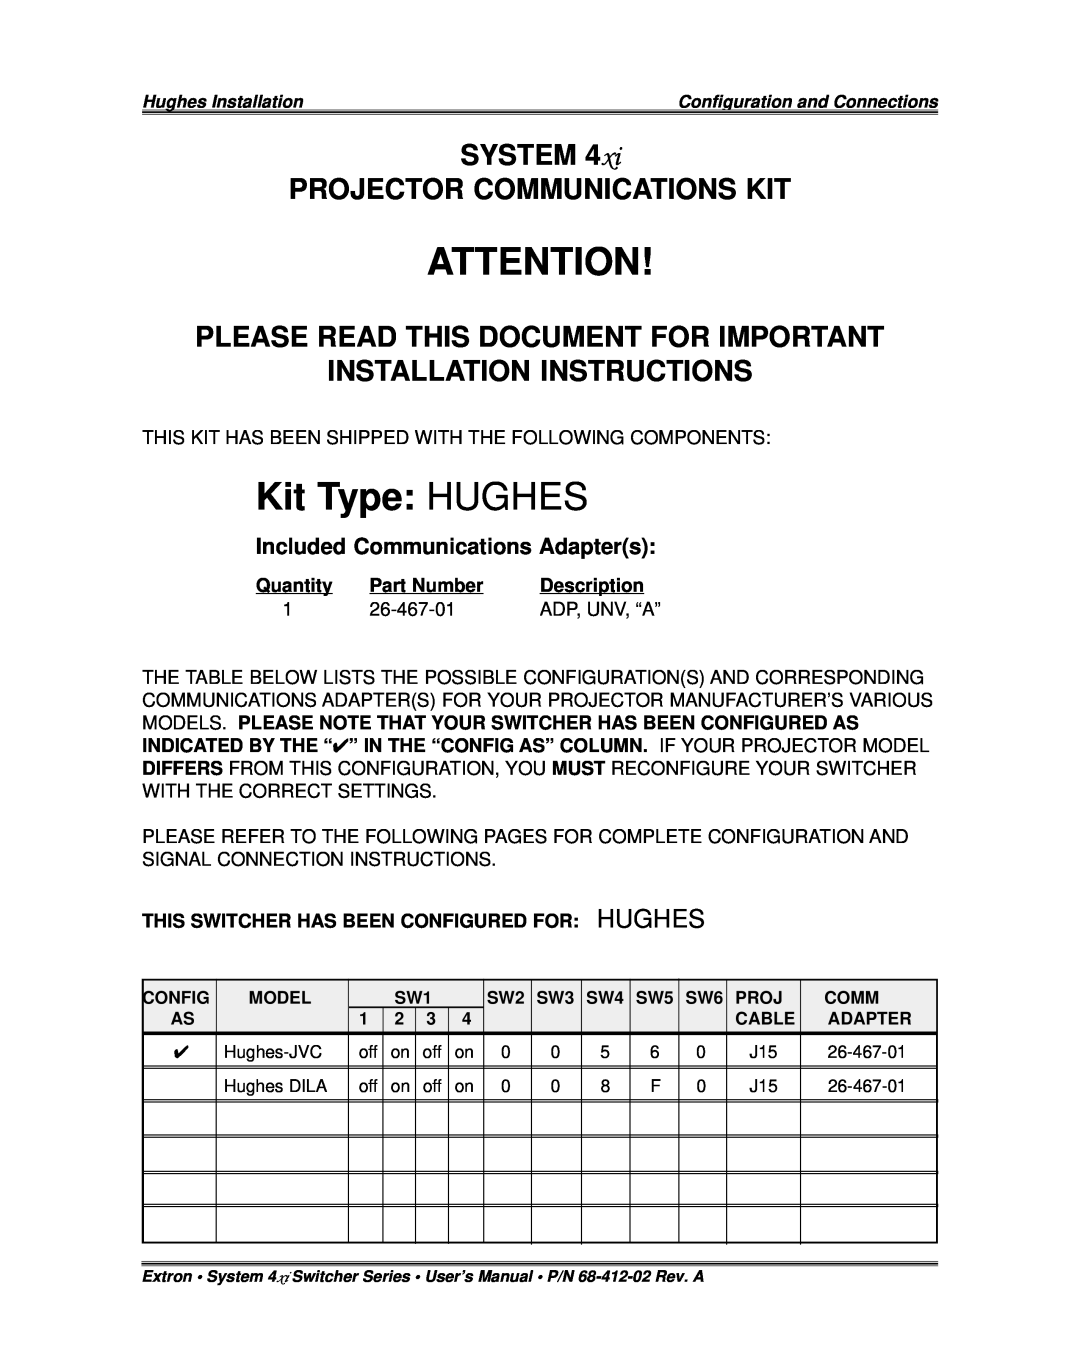 Extron electronic P/N 68-412-02 installation instructions Kit Type HUGHES, System Projector Communications Kit, Quantity 